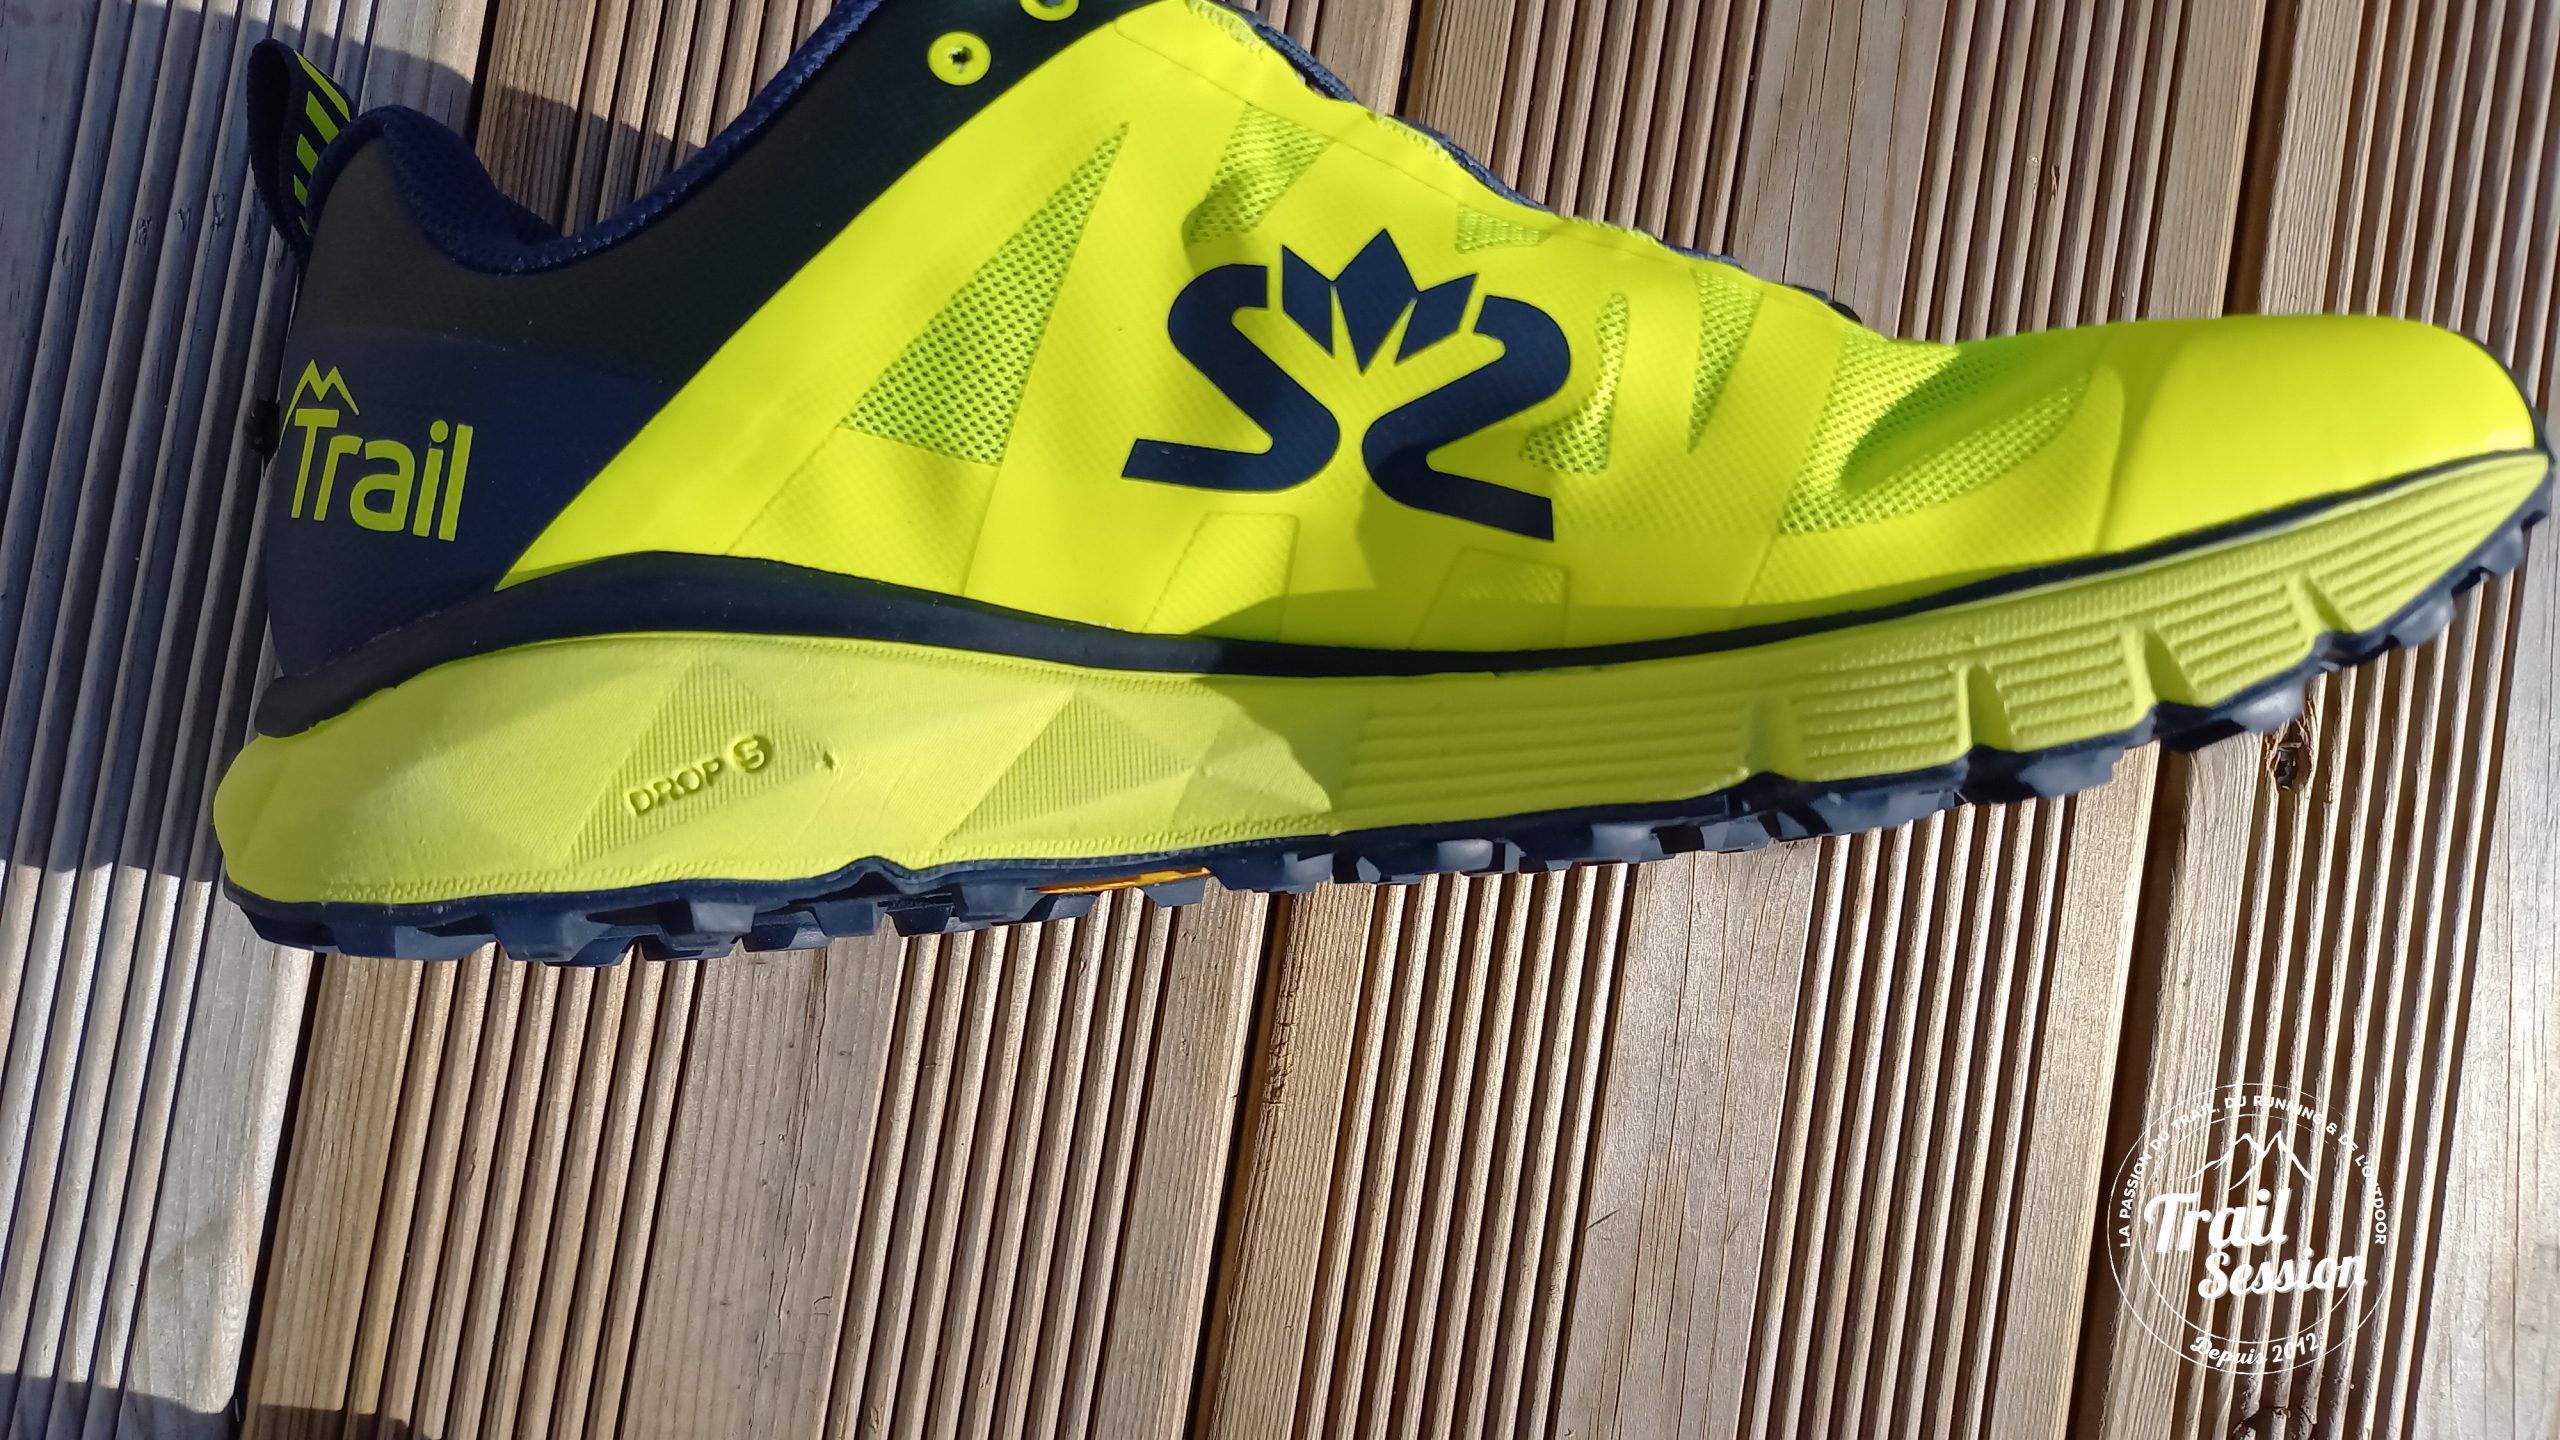 SALMING TRAIL T6 Homme Yellow - Navy - Chaussures Running pour